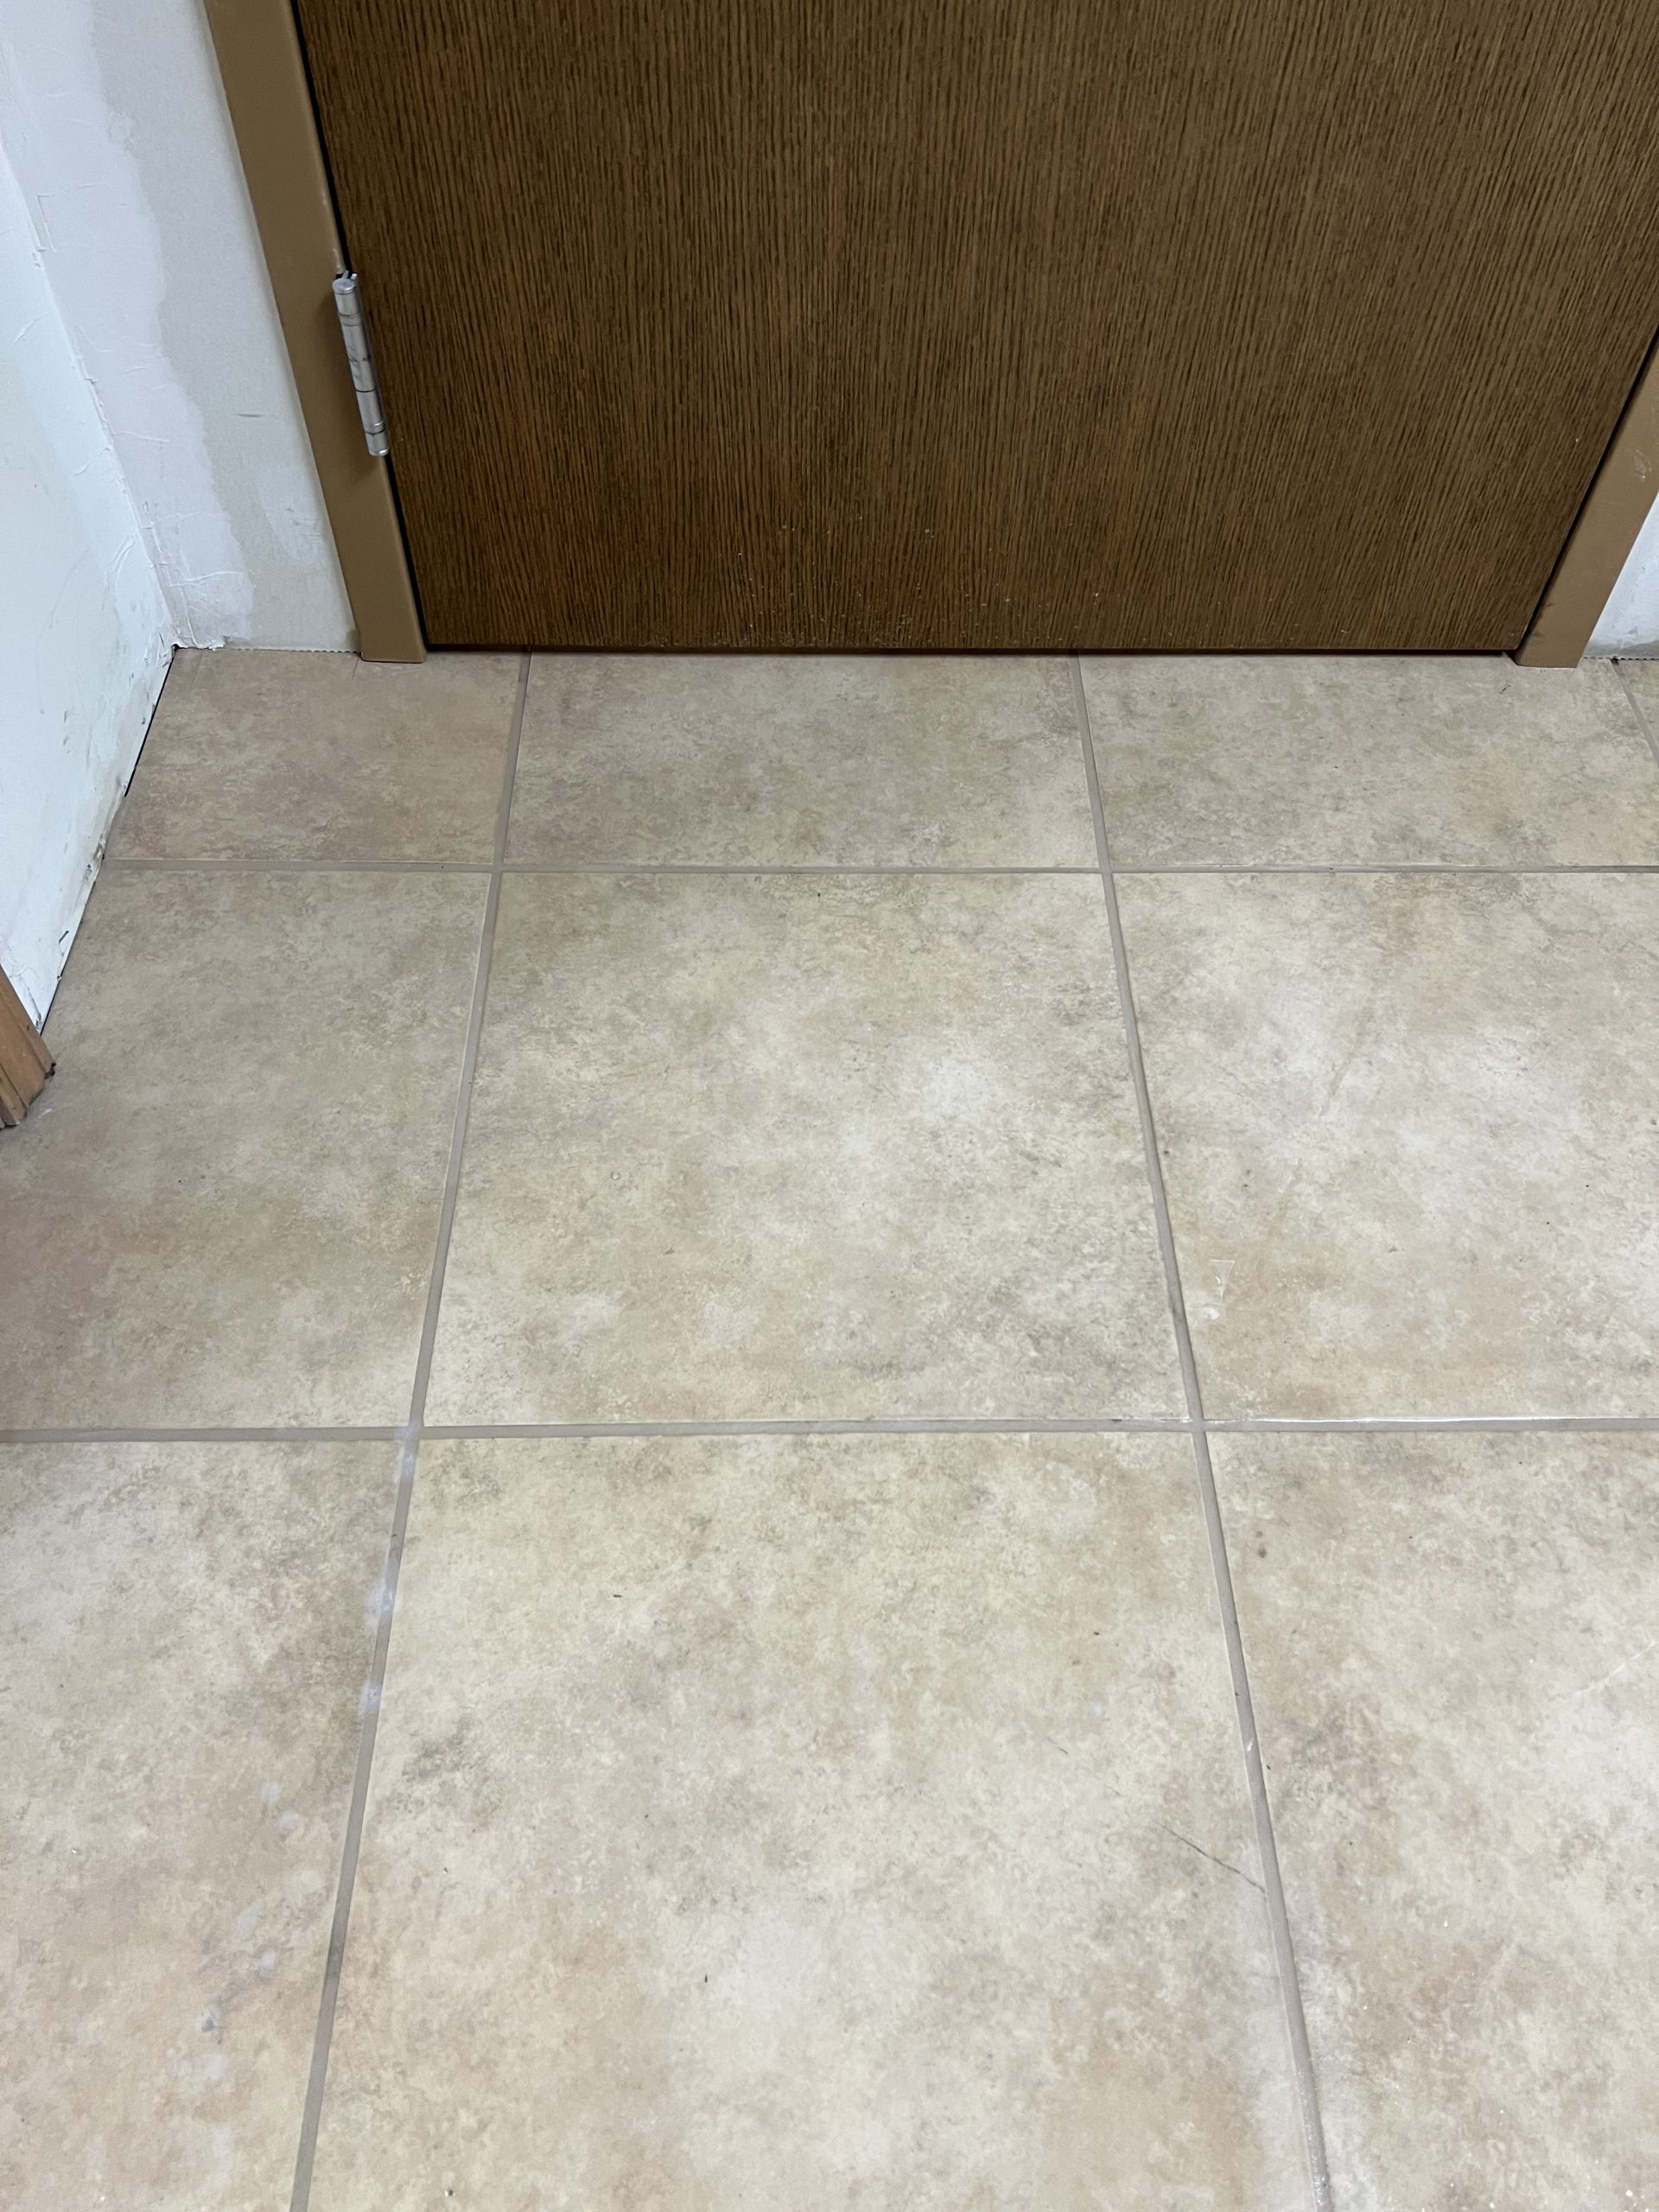 Tile & Grout Cleaning recently performed